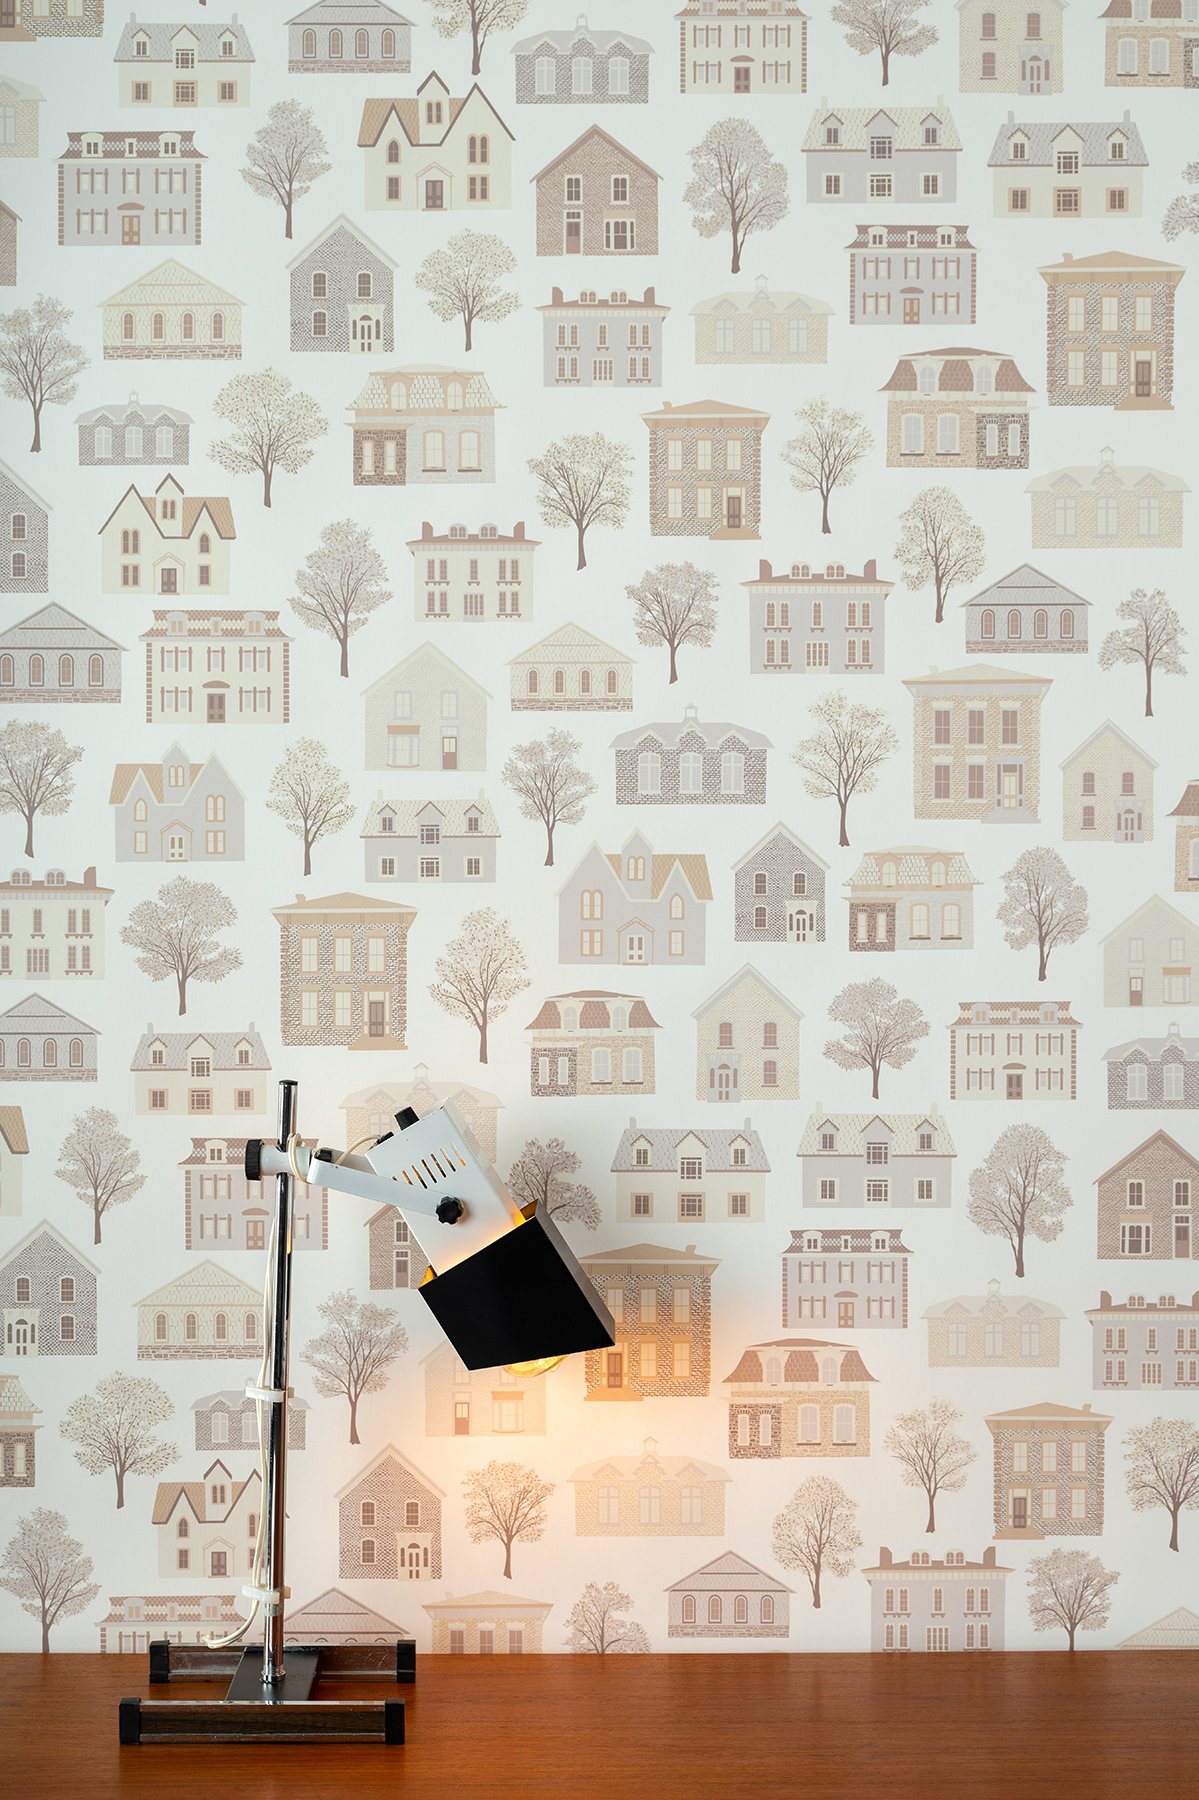 Kate Golding Historical Home wallpaper // Modern wallcoverings and interior decor.